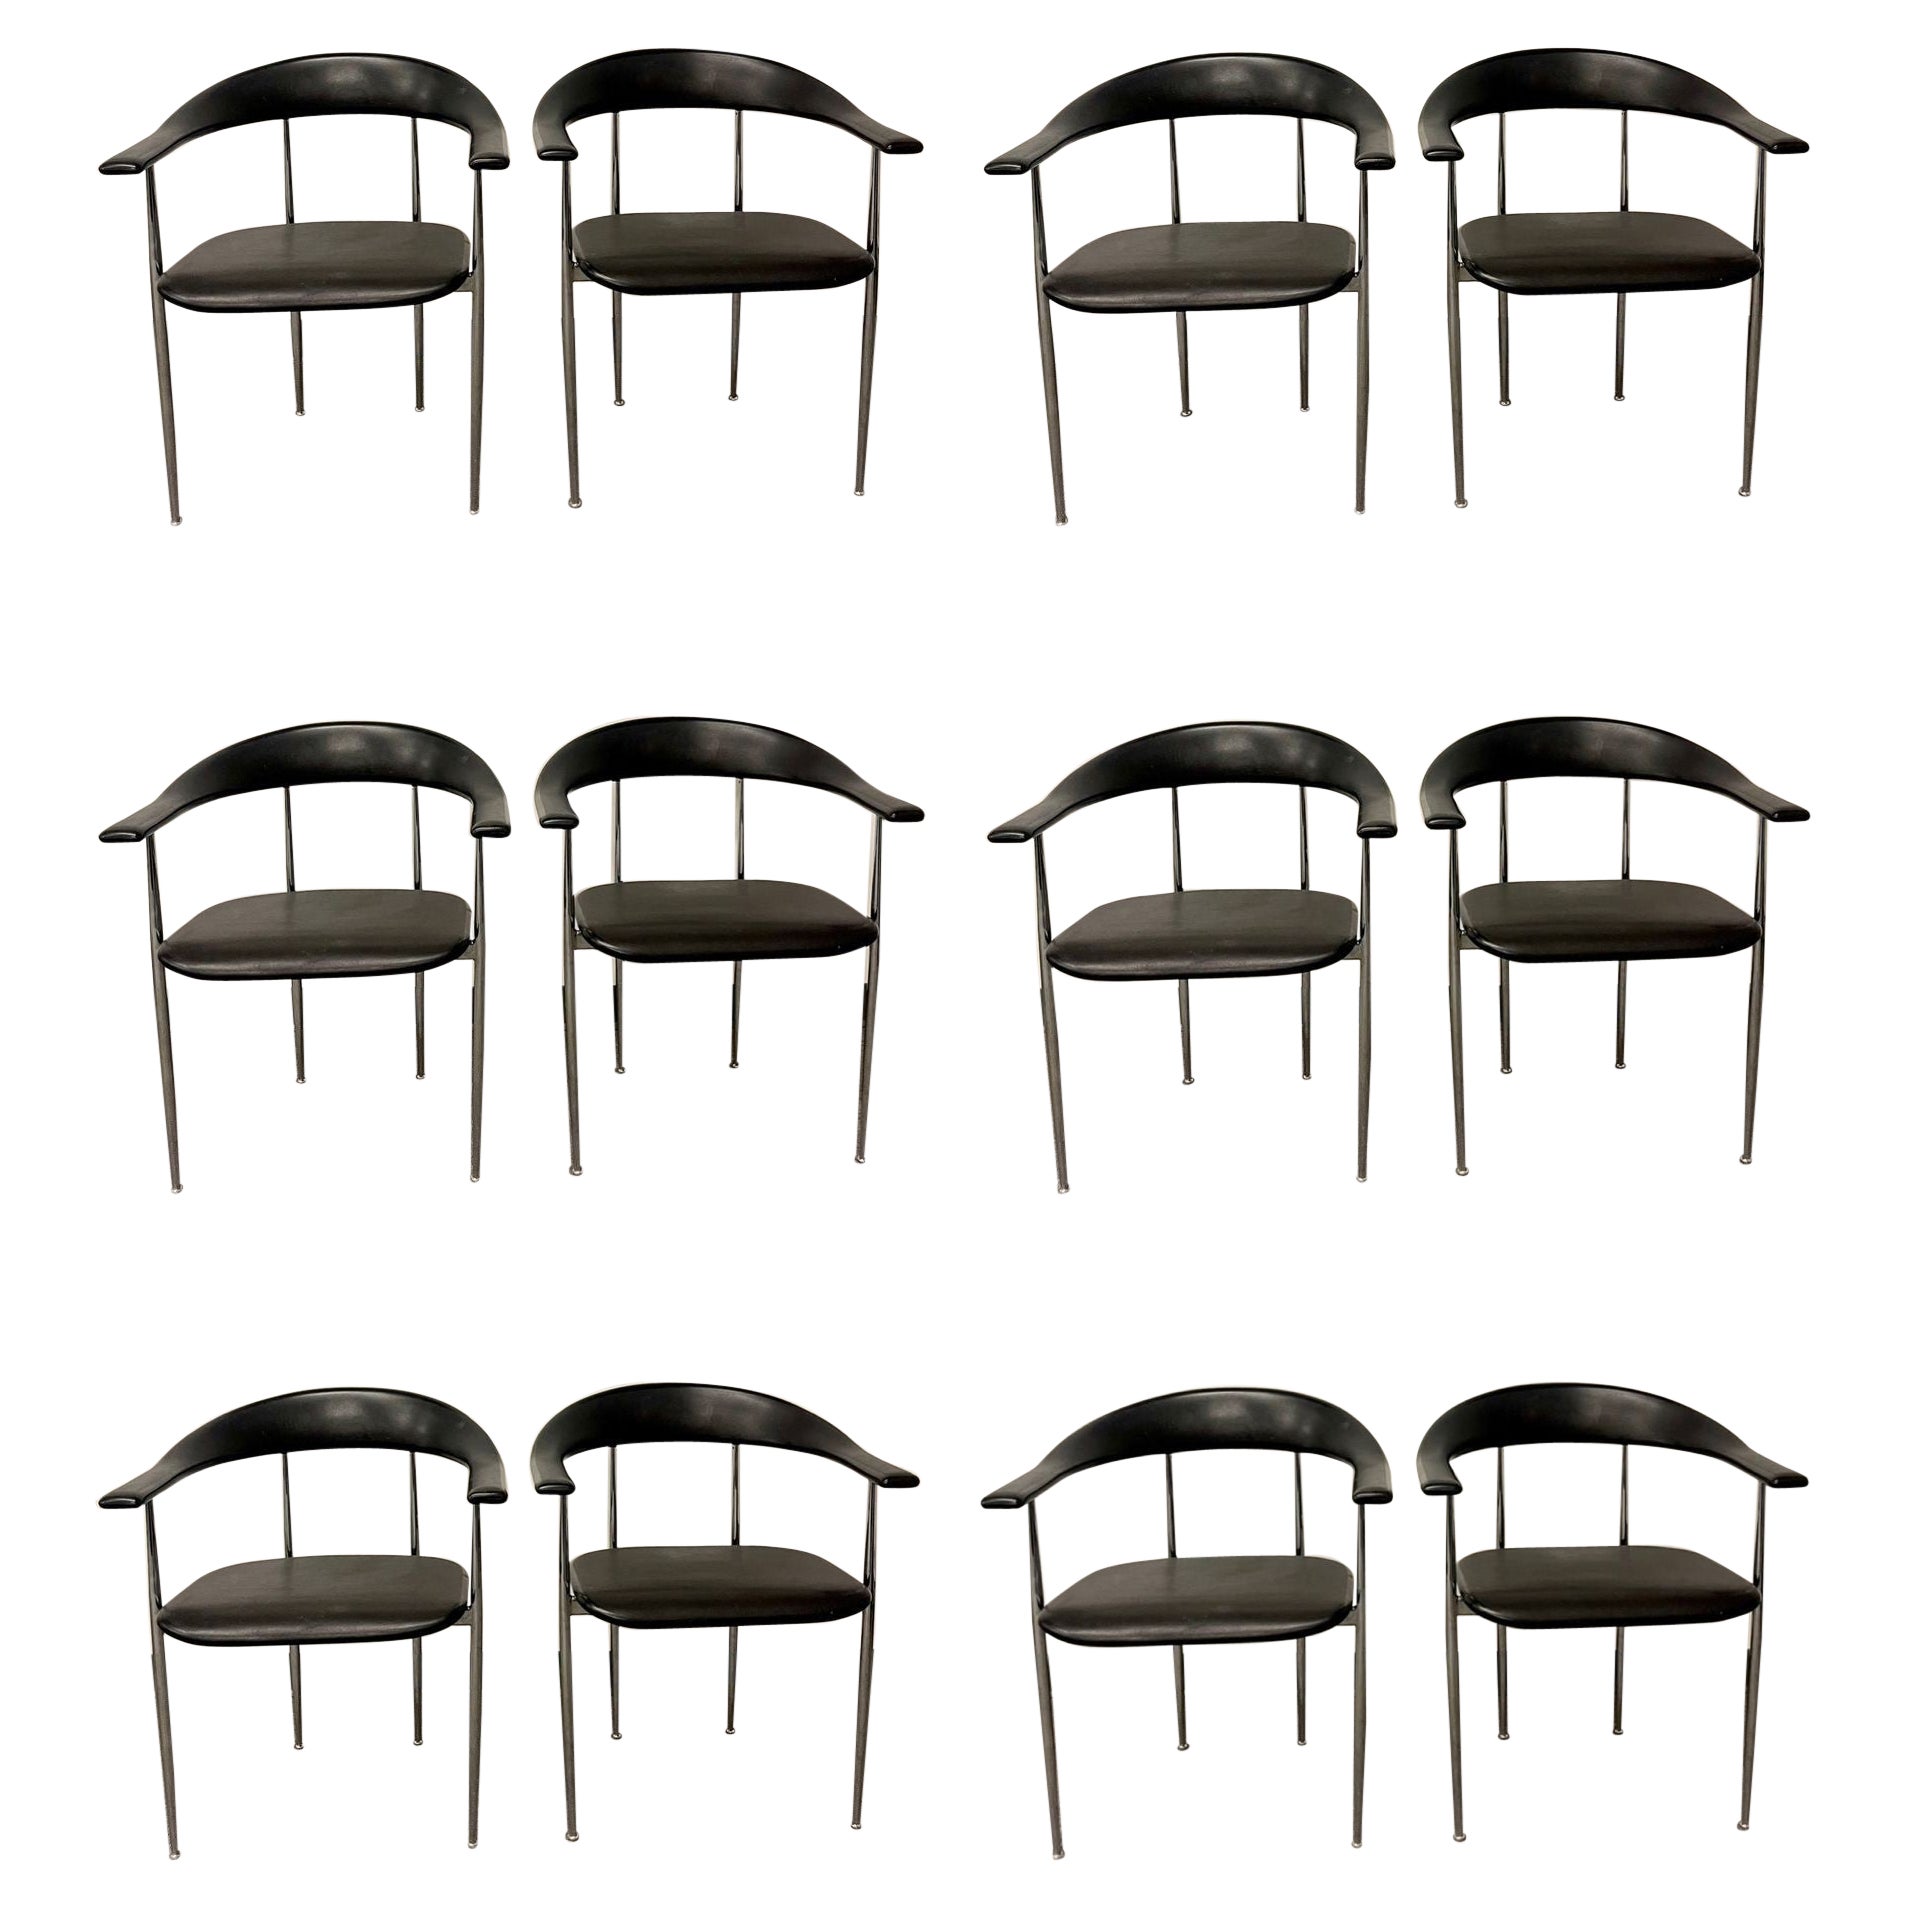 Set of 12 Black & Chrome Italian Dining Chairs, Arm Chairs